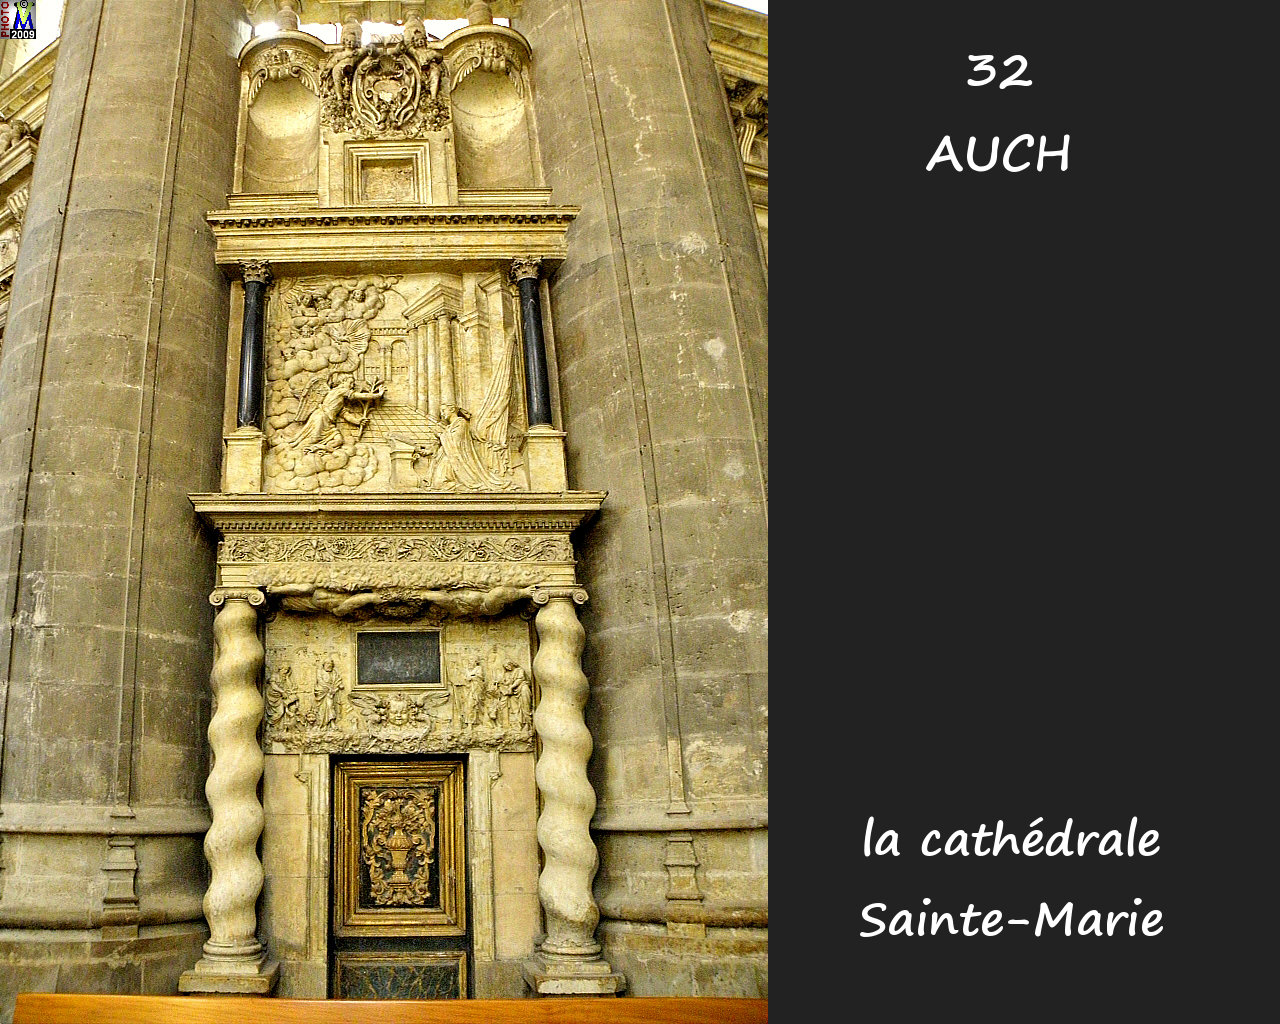 32AUCH_cathedrale_236.jpg